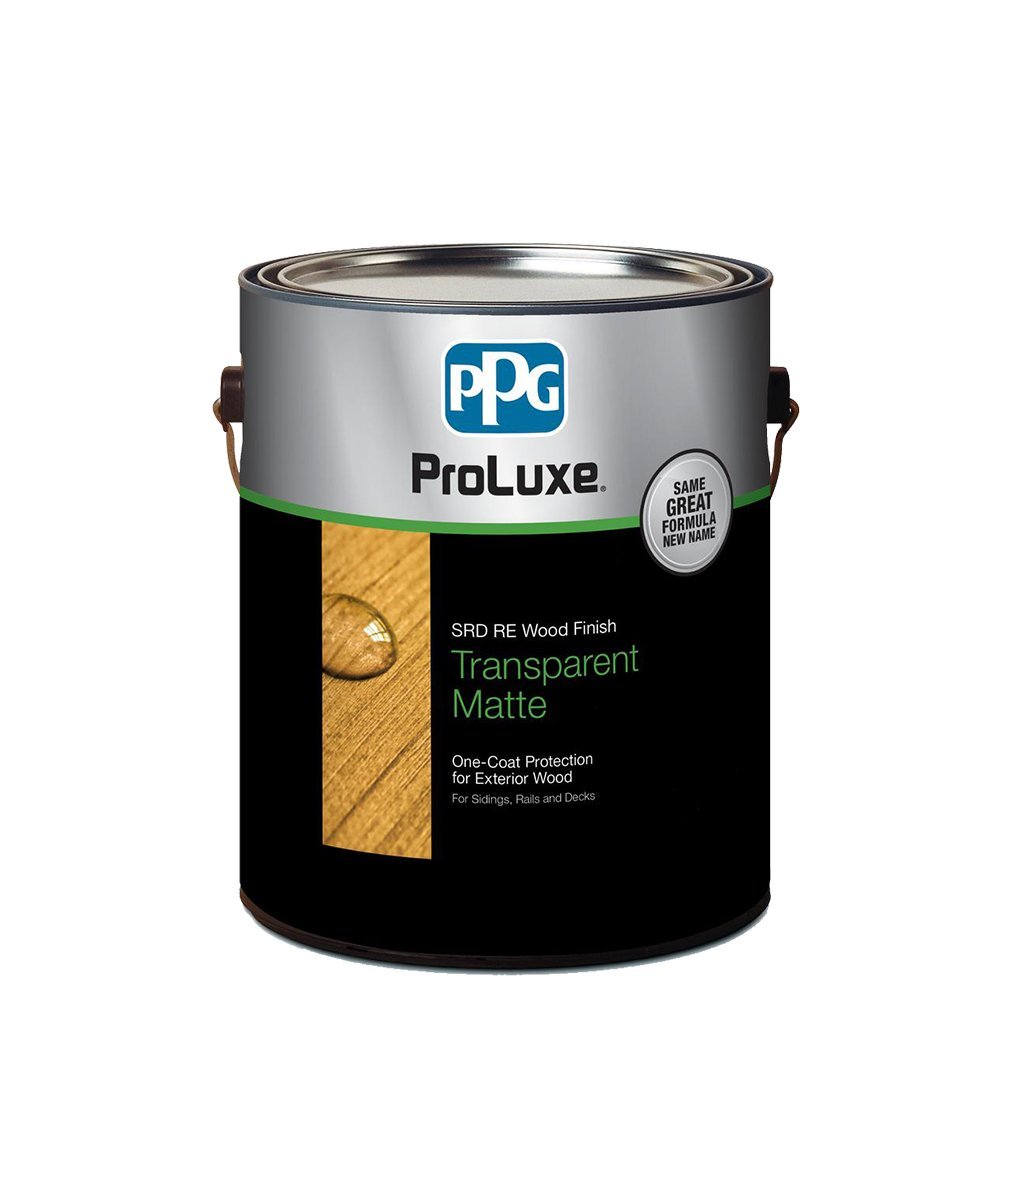 Sikkens Proluxe SRD RE Wood Finish available at Regal Paint Centers in Maryland, Virginia & the Washington, DC metro area